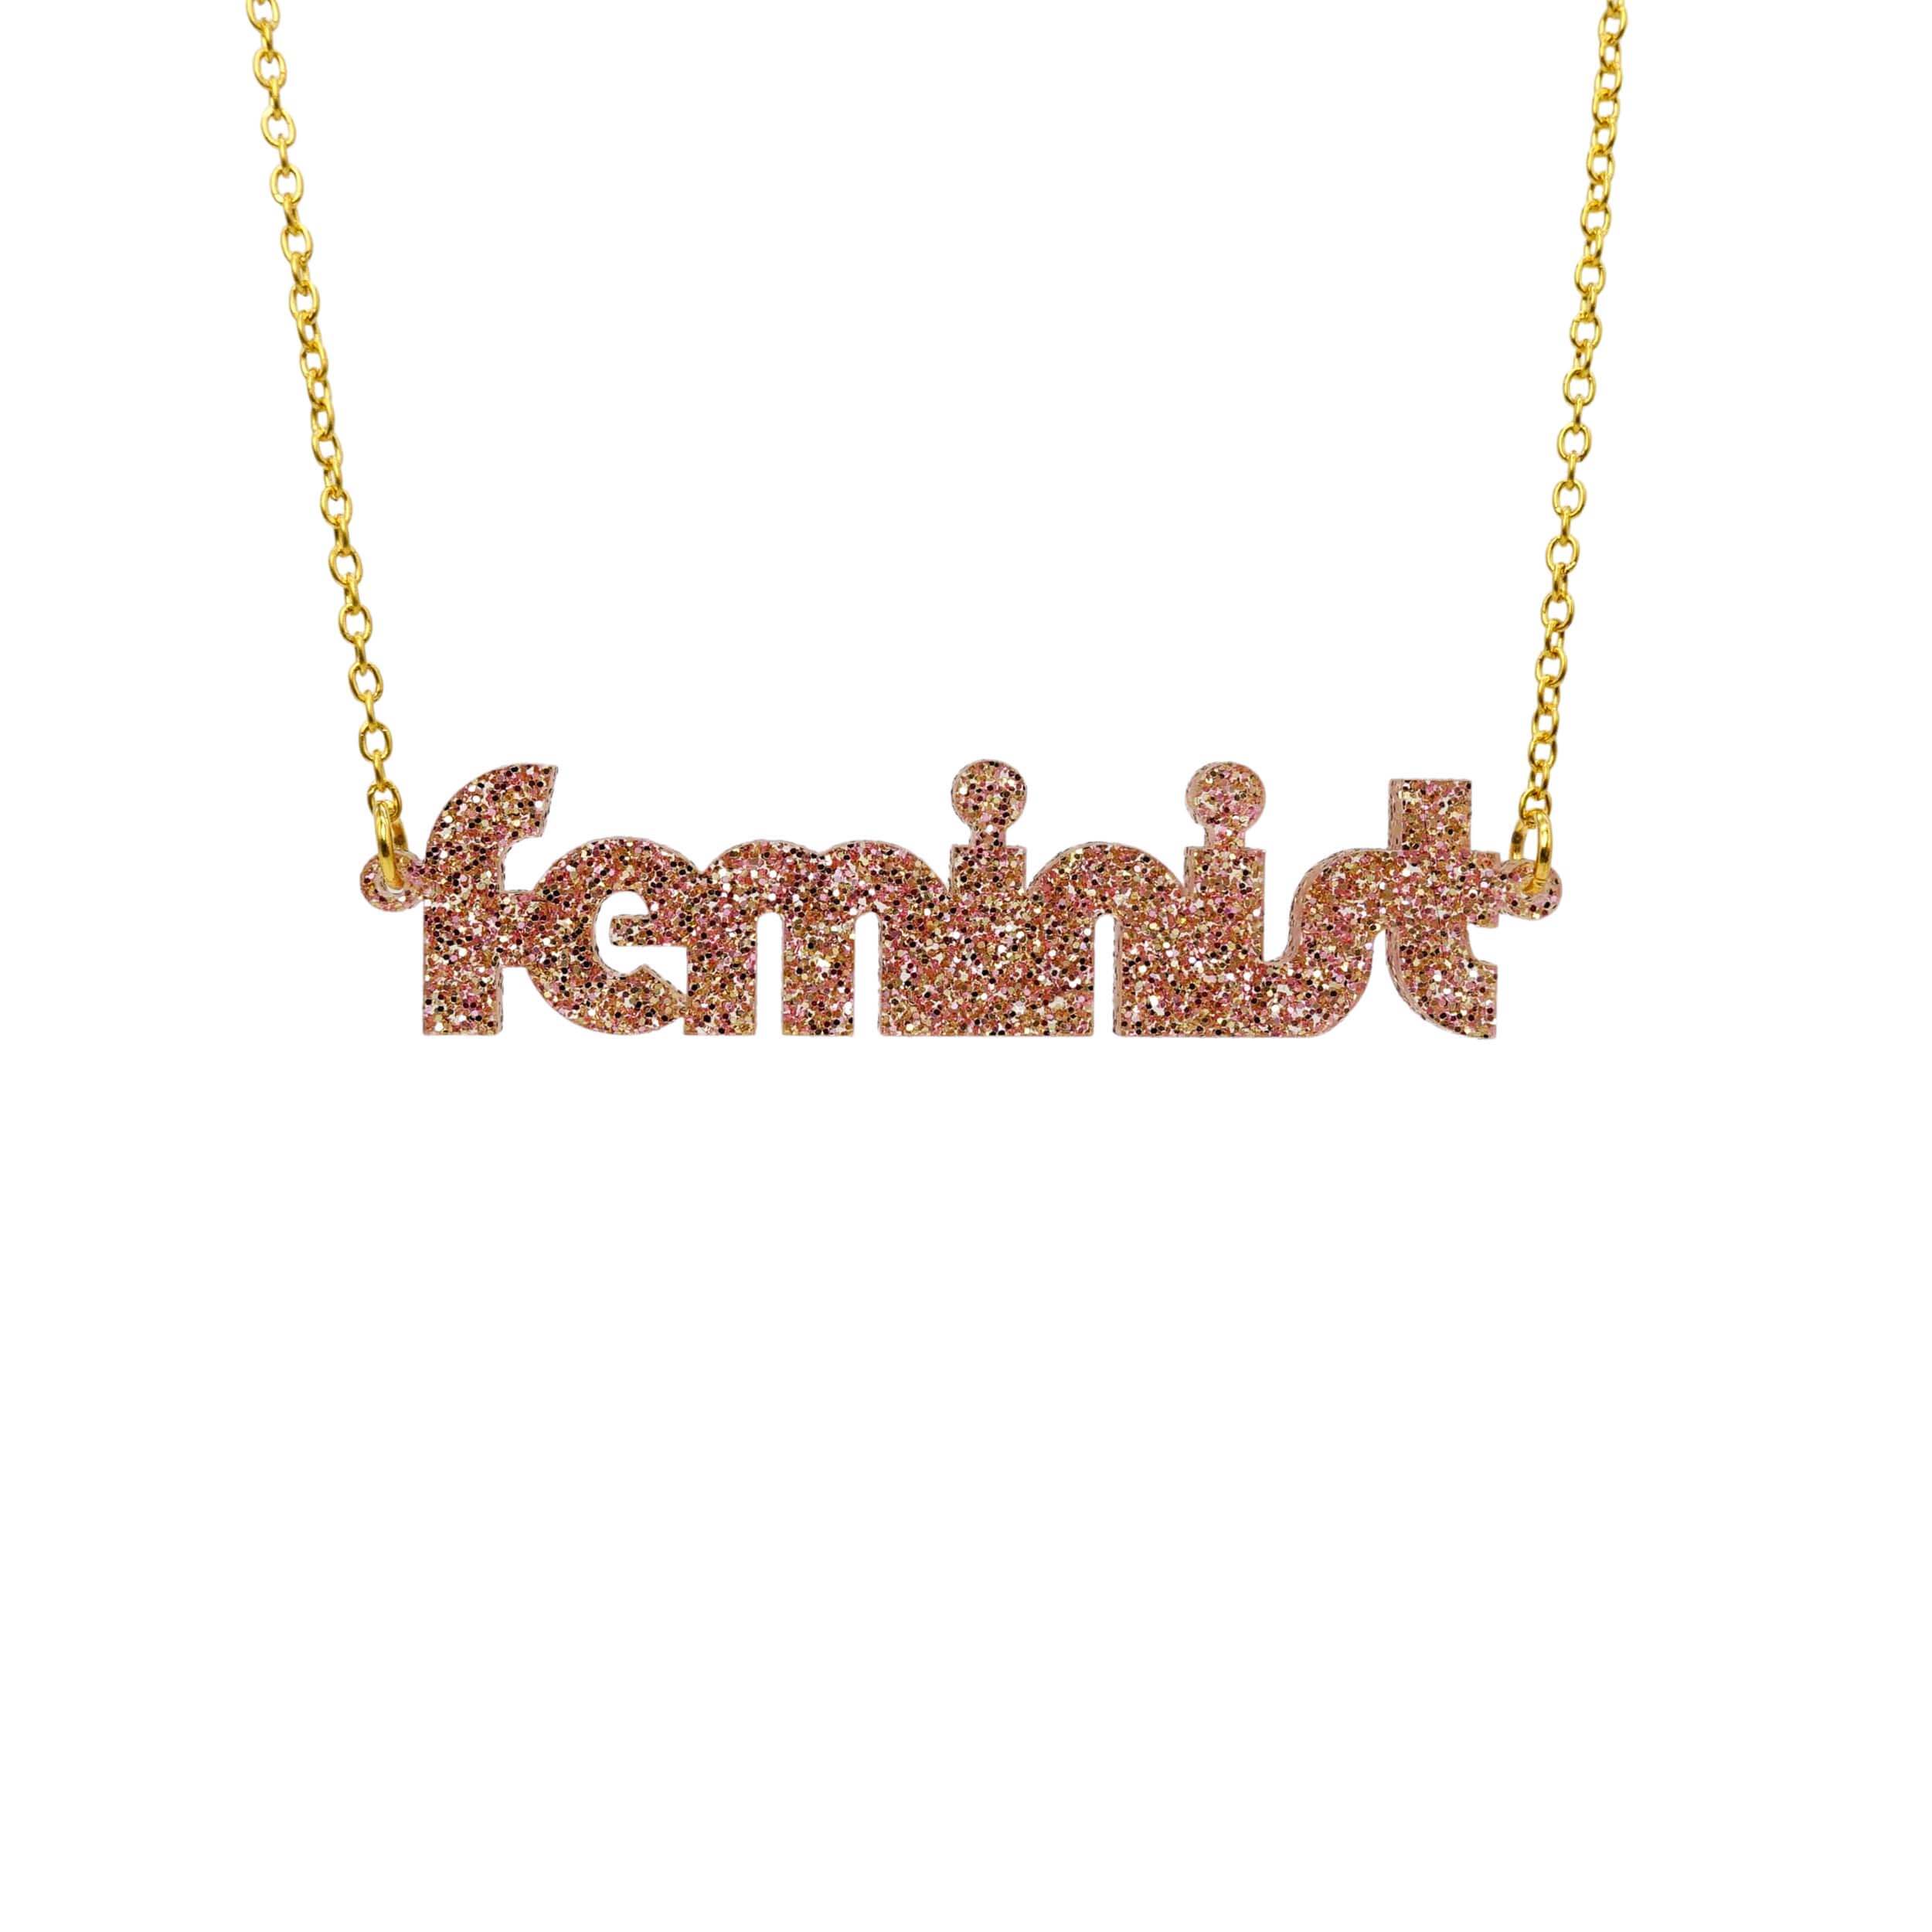 Disco feminist necklace in pink fizz glitter, shown hanging against a white background.